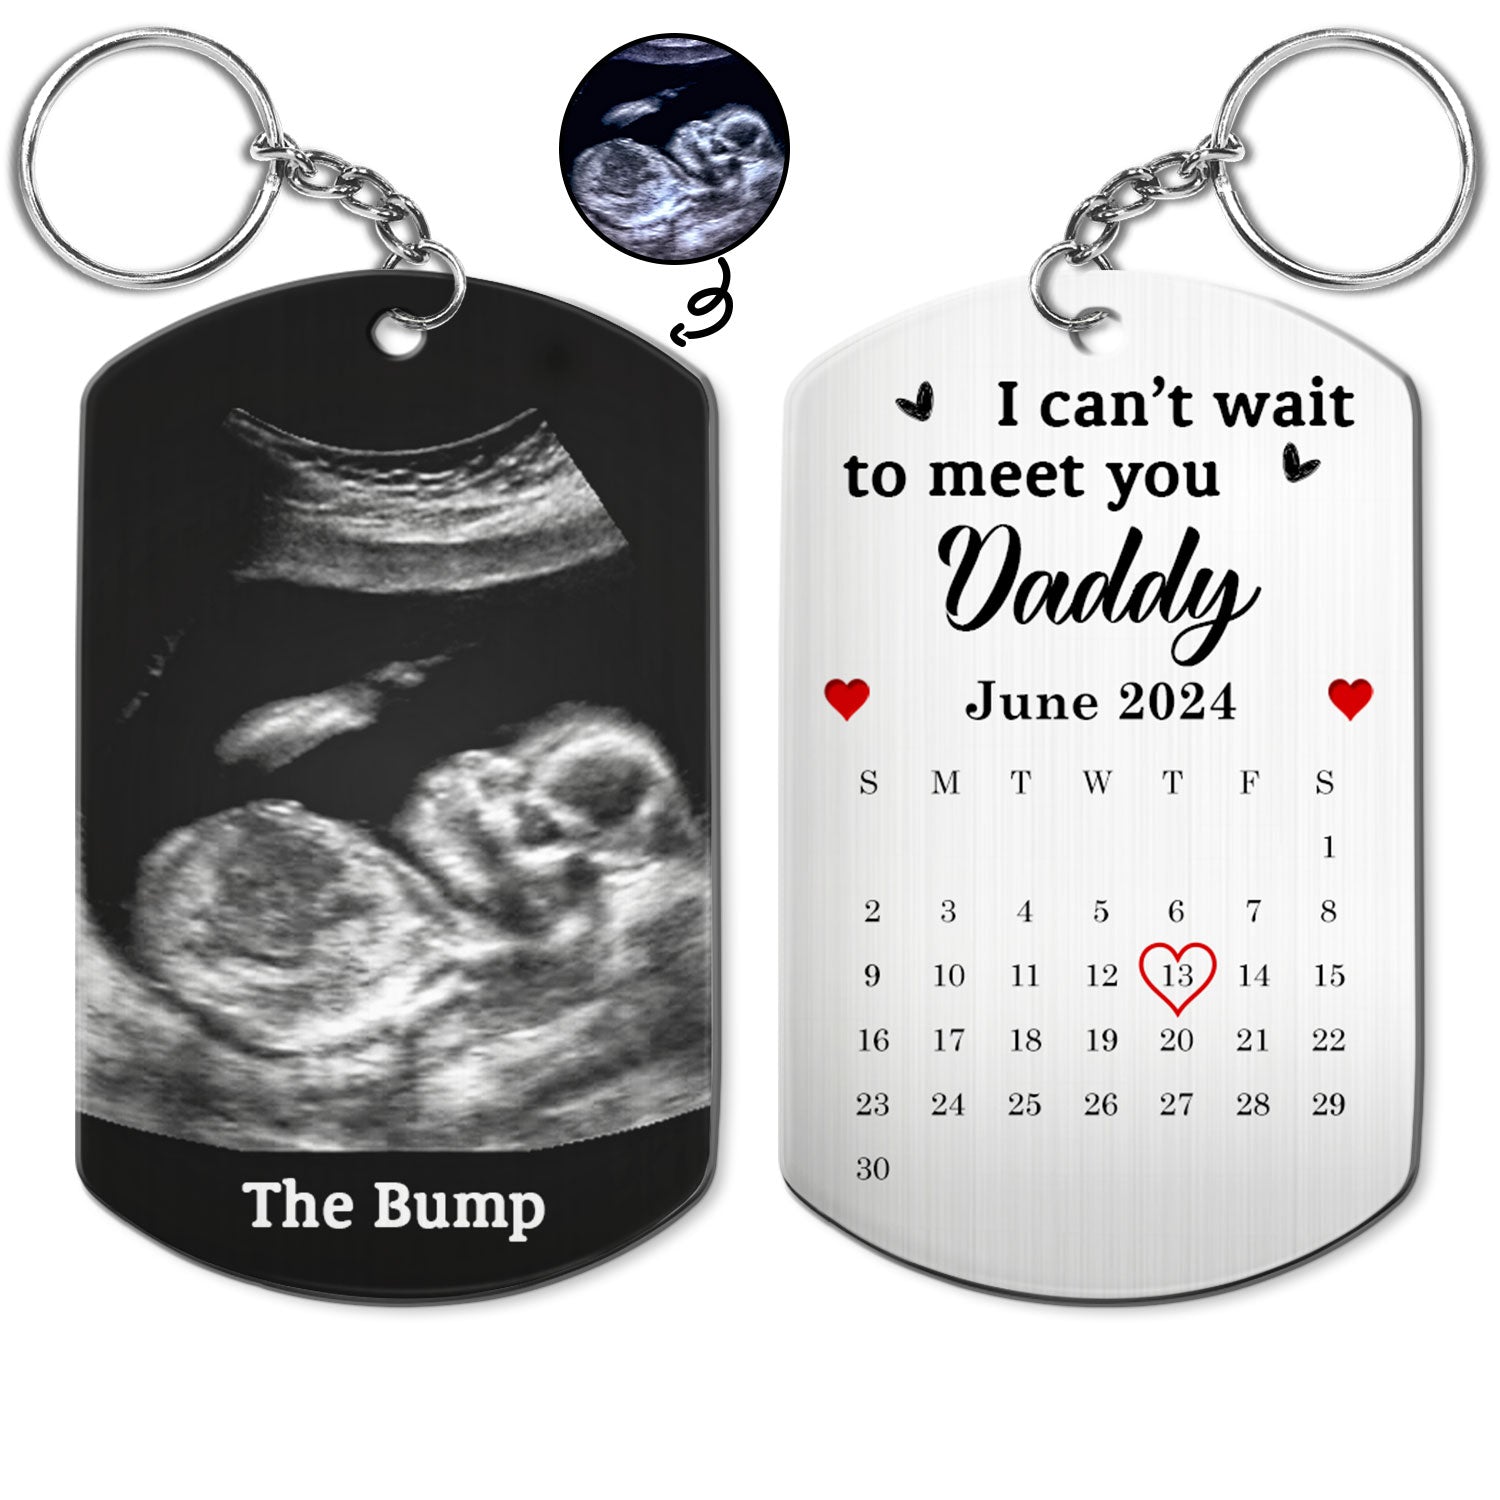 Custom Photo Calendar Can't Wait To Meet You - Gift For Father - Personalized Aluminum Keychain